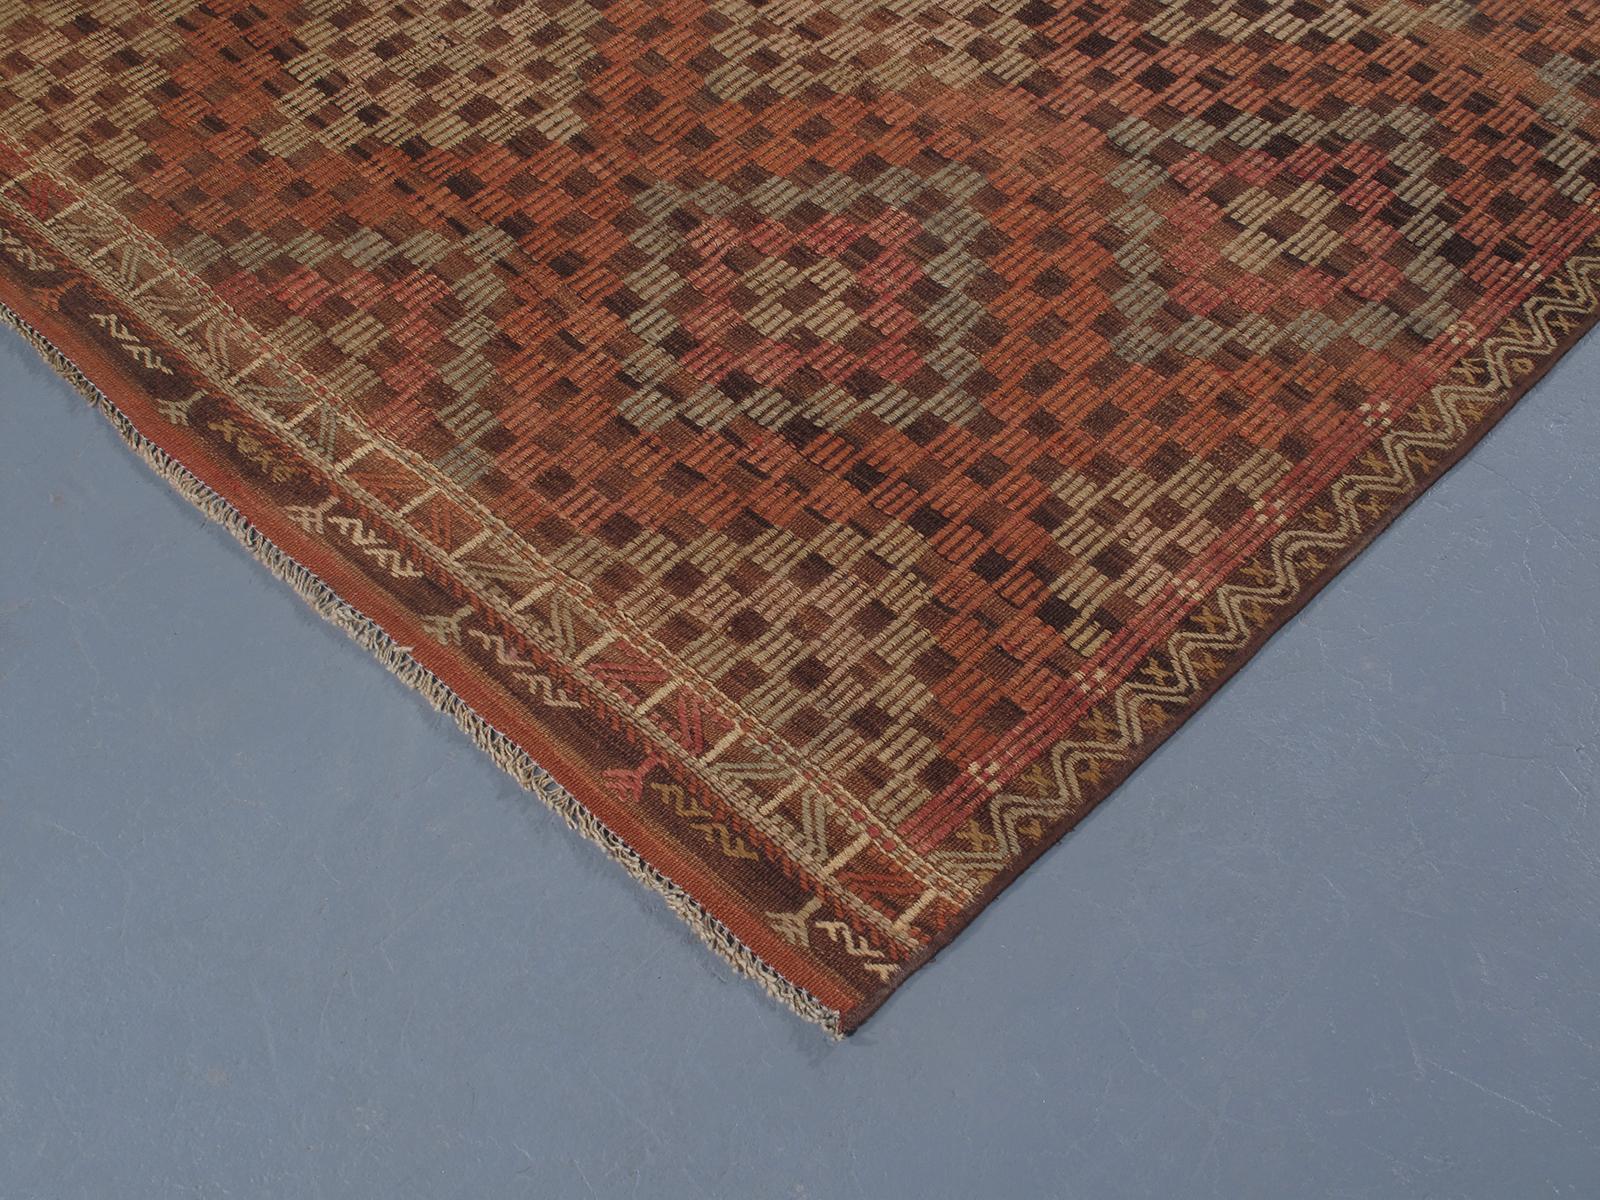 Vintage Mid-Century Modern Tribal Flatweave Rug  In Excellent Condition For Sale In New York, NY